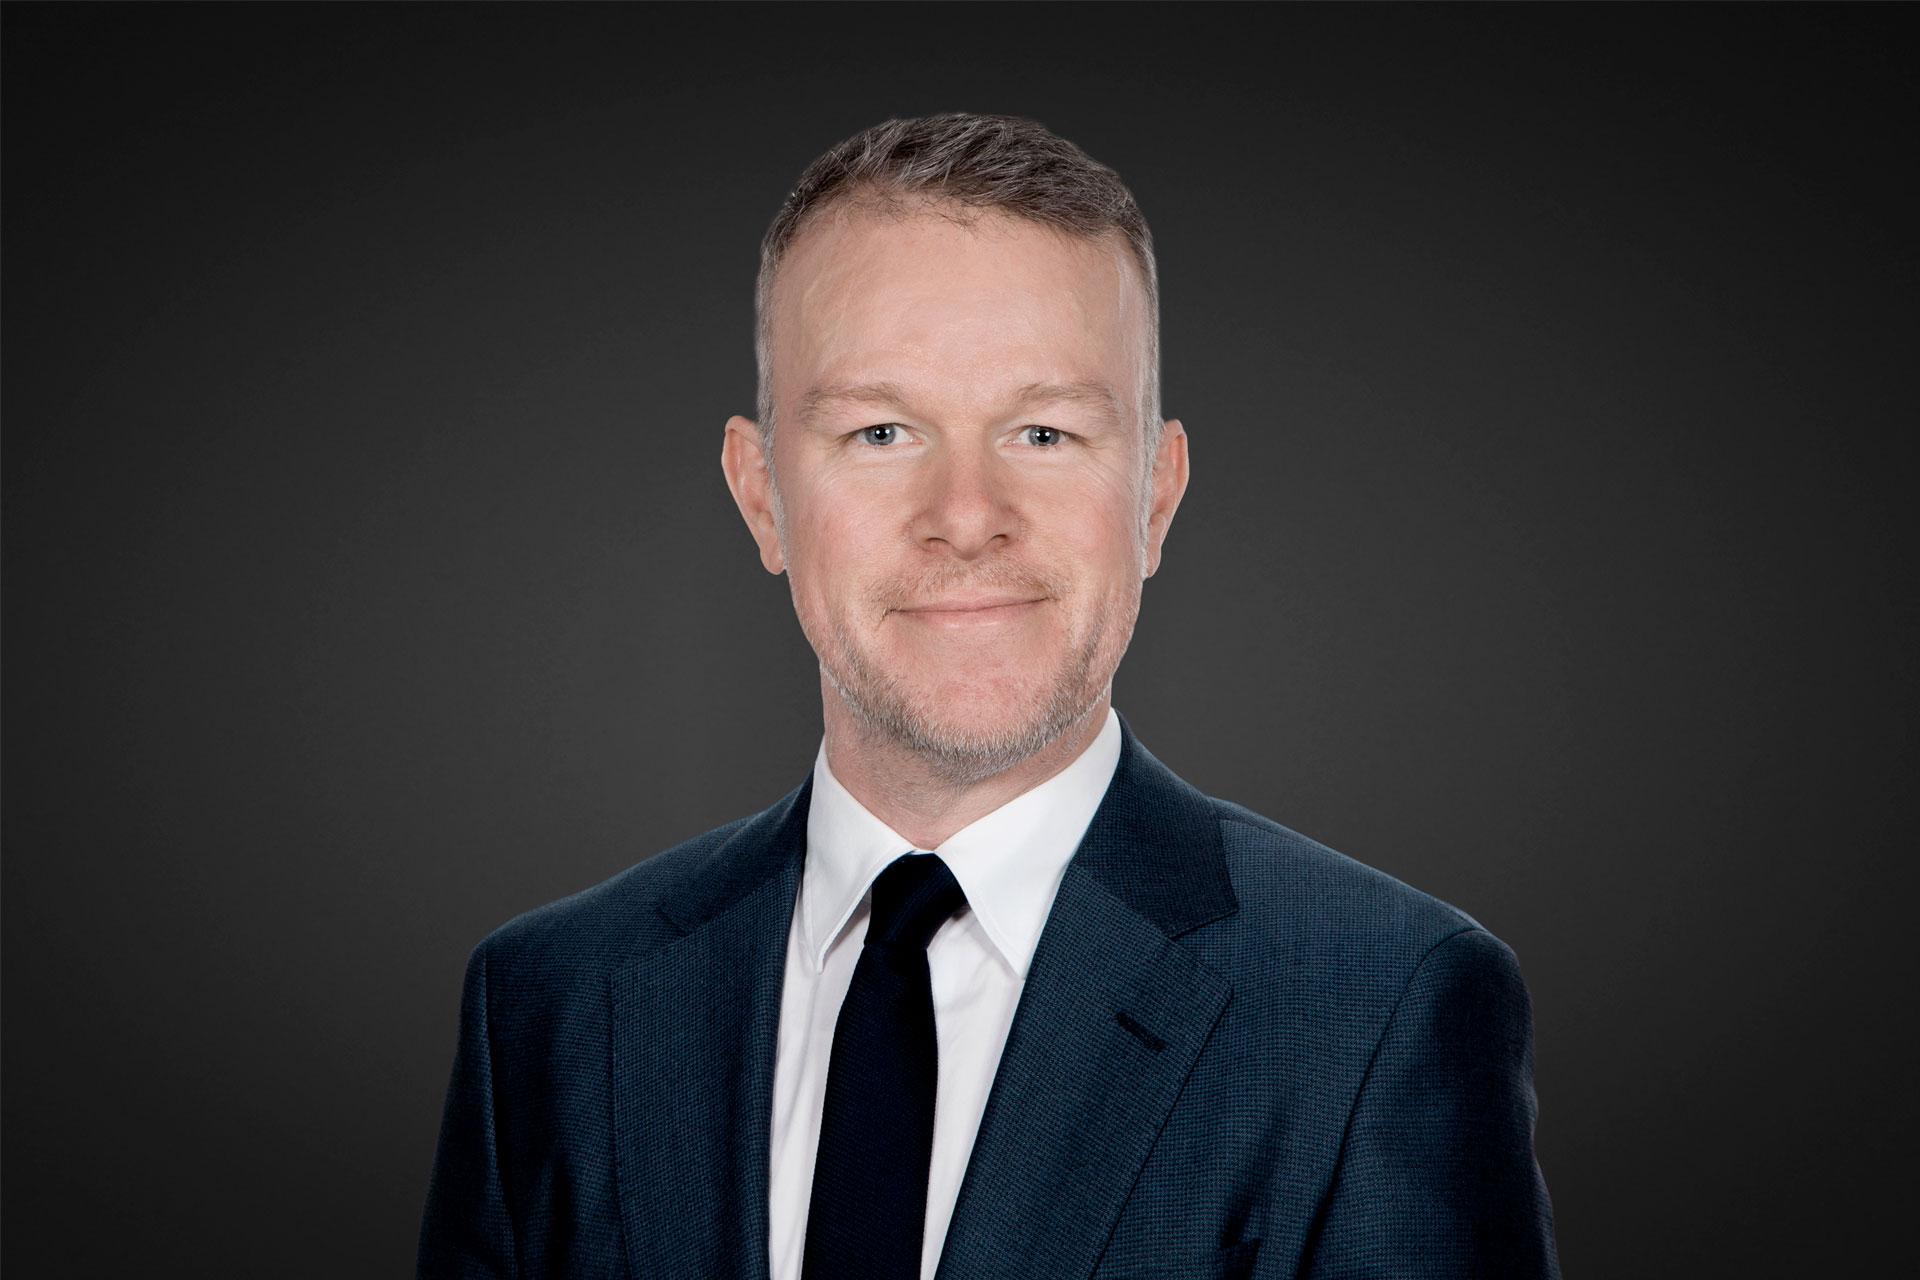 Vontobel appoints new Head of Fixed Income Boutique